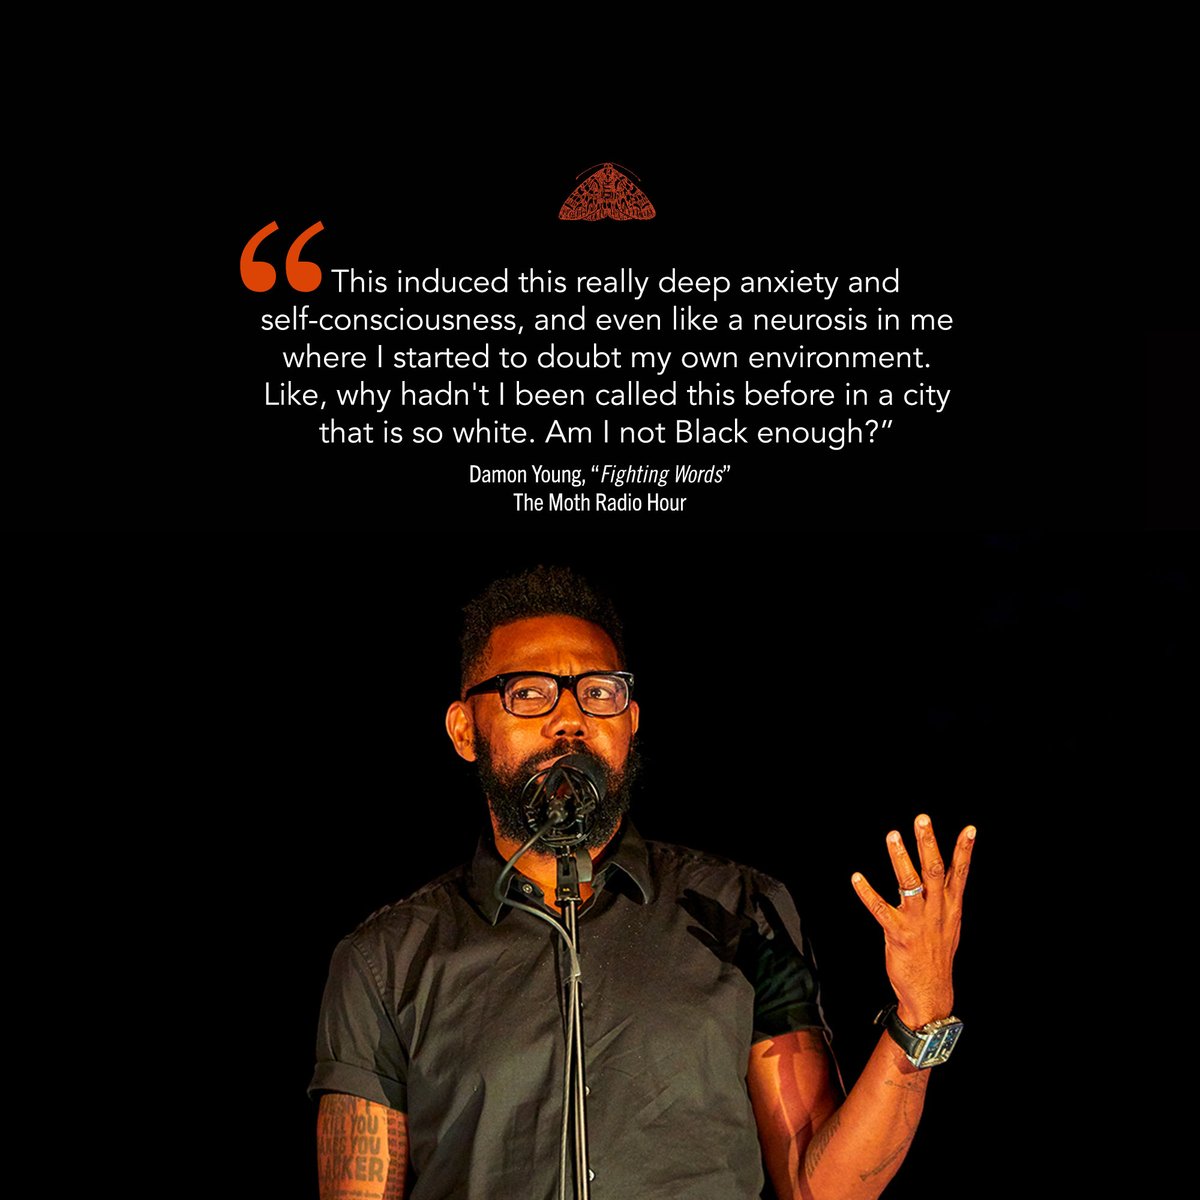 On this week's #MothRadioHour, Damon Young (@VerySmartBros) questions his sense of self based on the power of a racial slur. Listen to Damon's story and more stories of shifting perspectives, new outlooks, & realizations that shake our foundations here: bit.ly/4cLgcyE